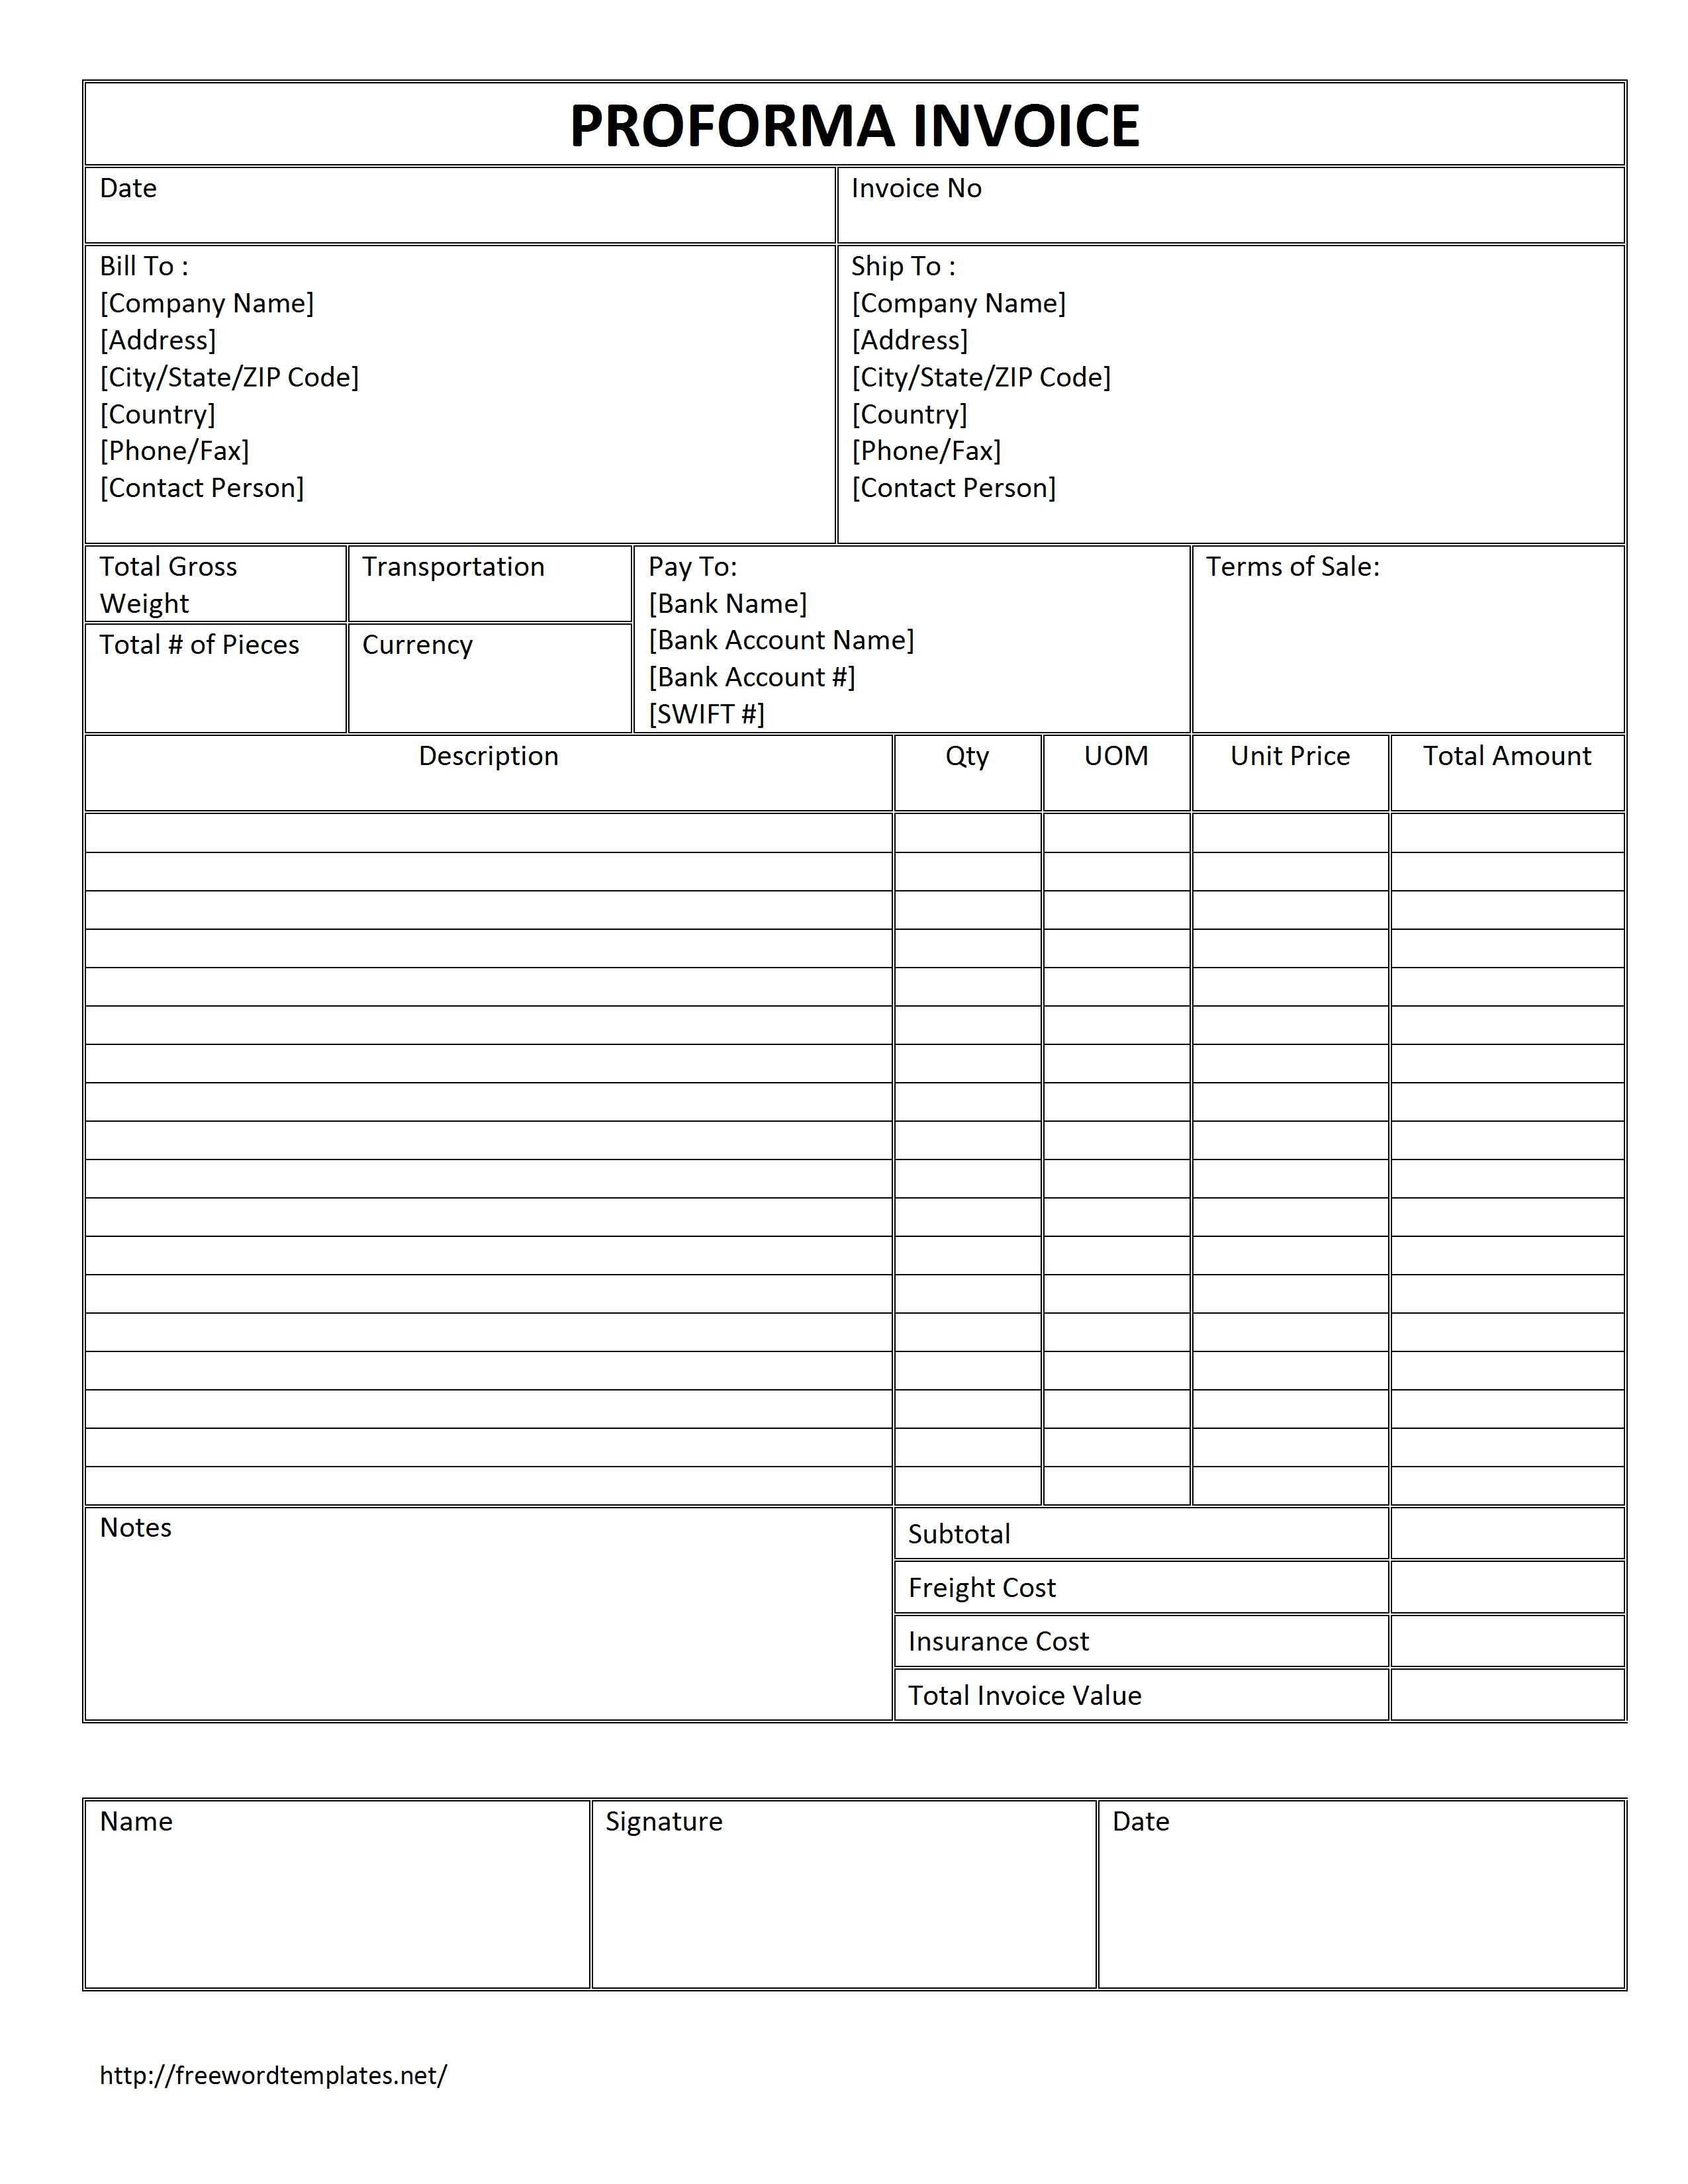 commercial invoice pro forma invoic